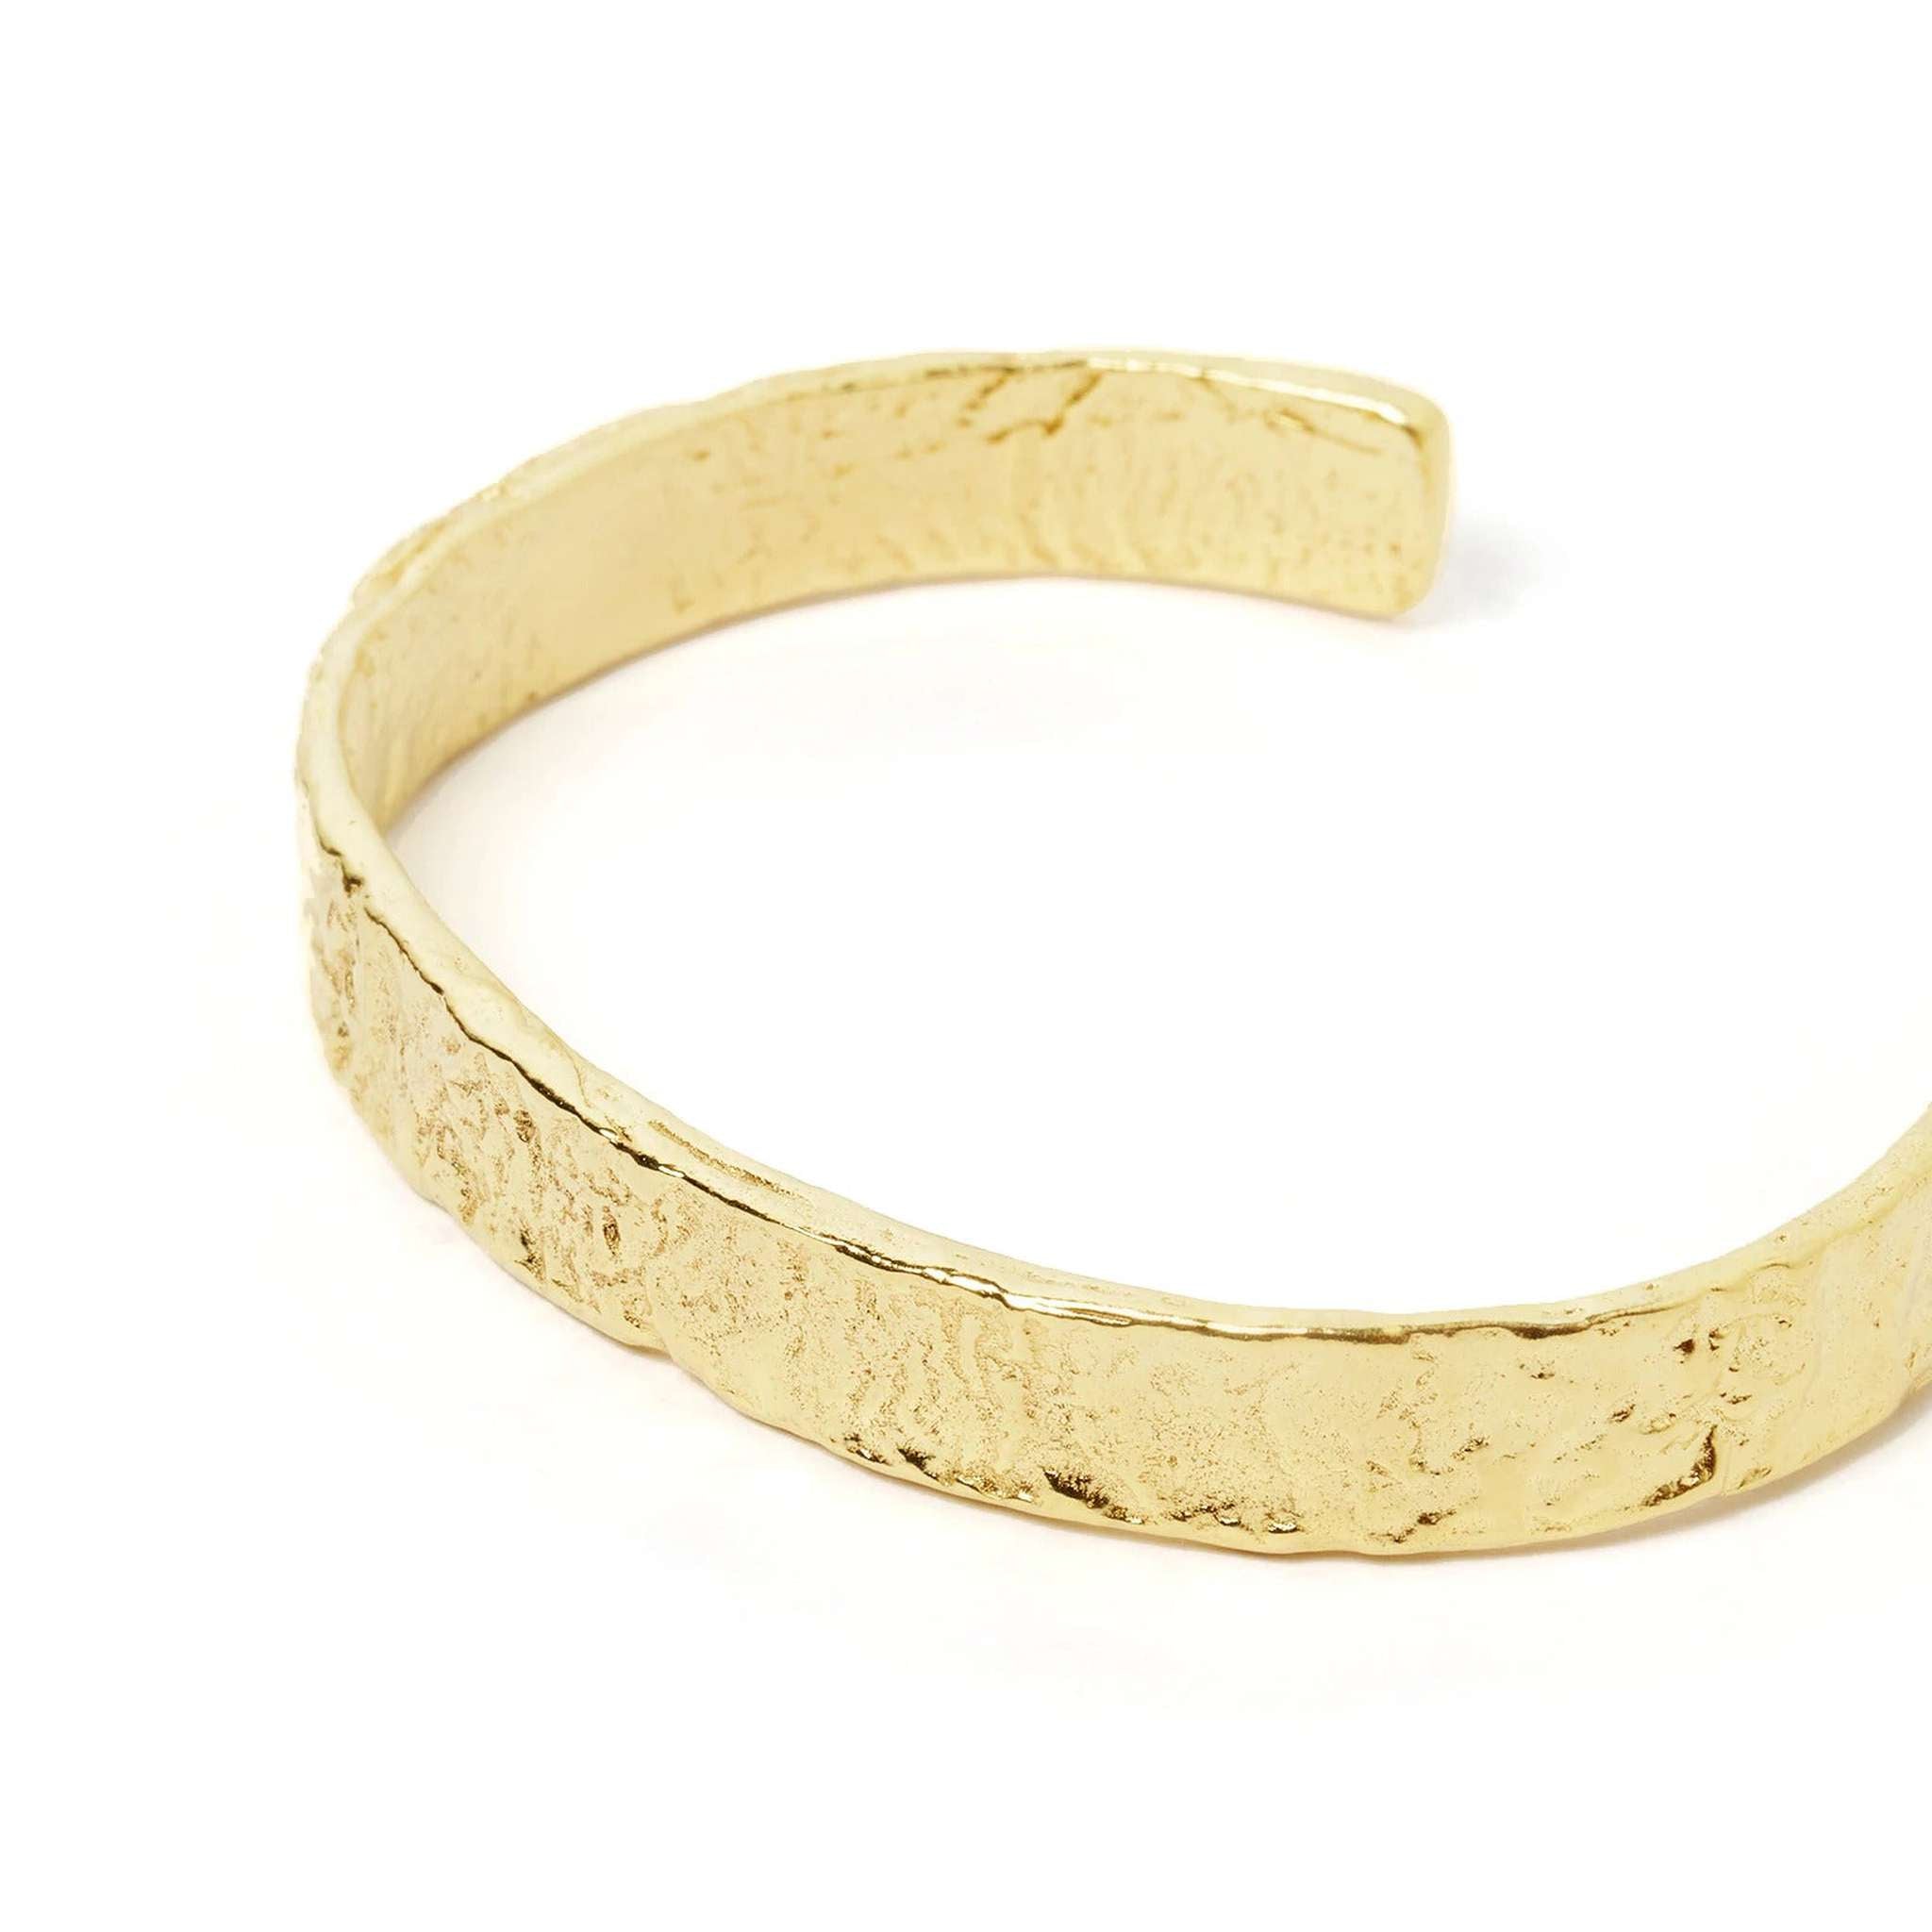 arms of eve gold cuff textured bracelet